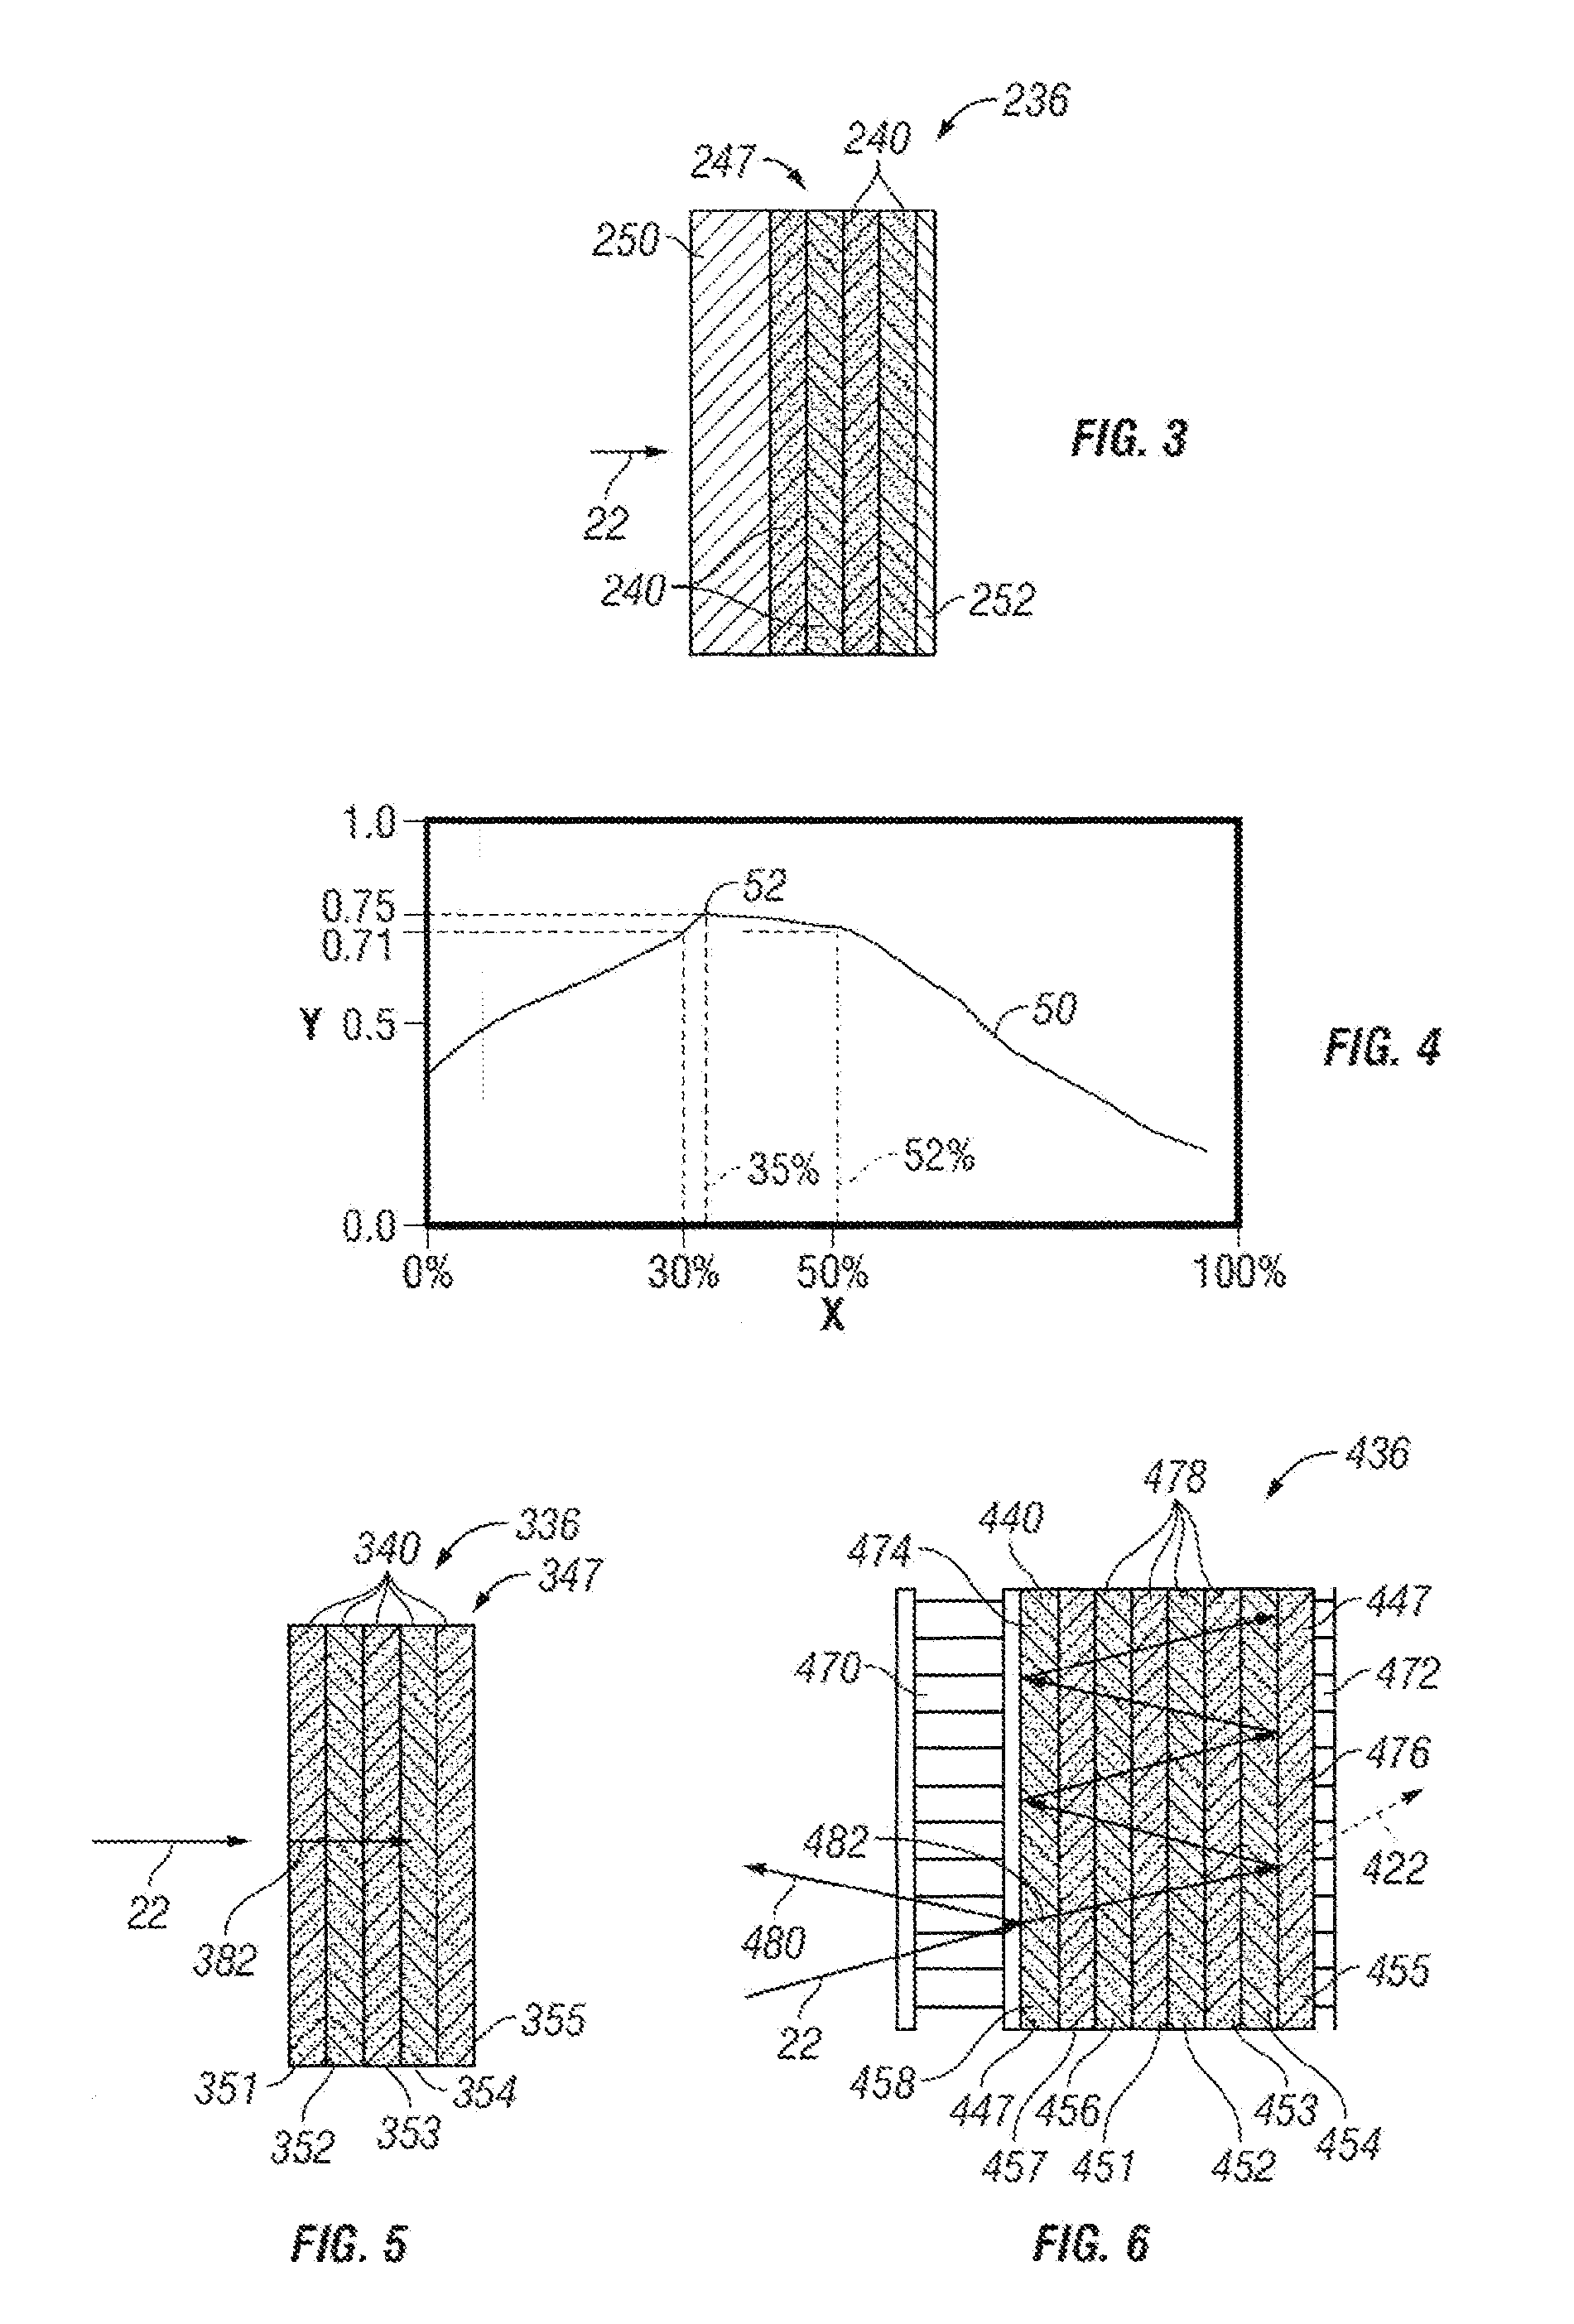 Thermal-acoustic sections for an aircraft